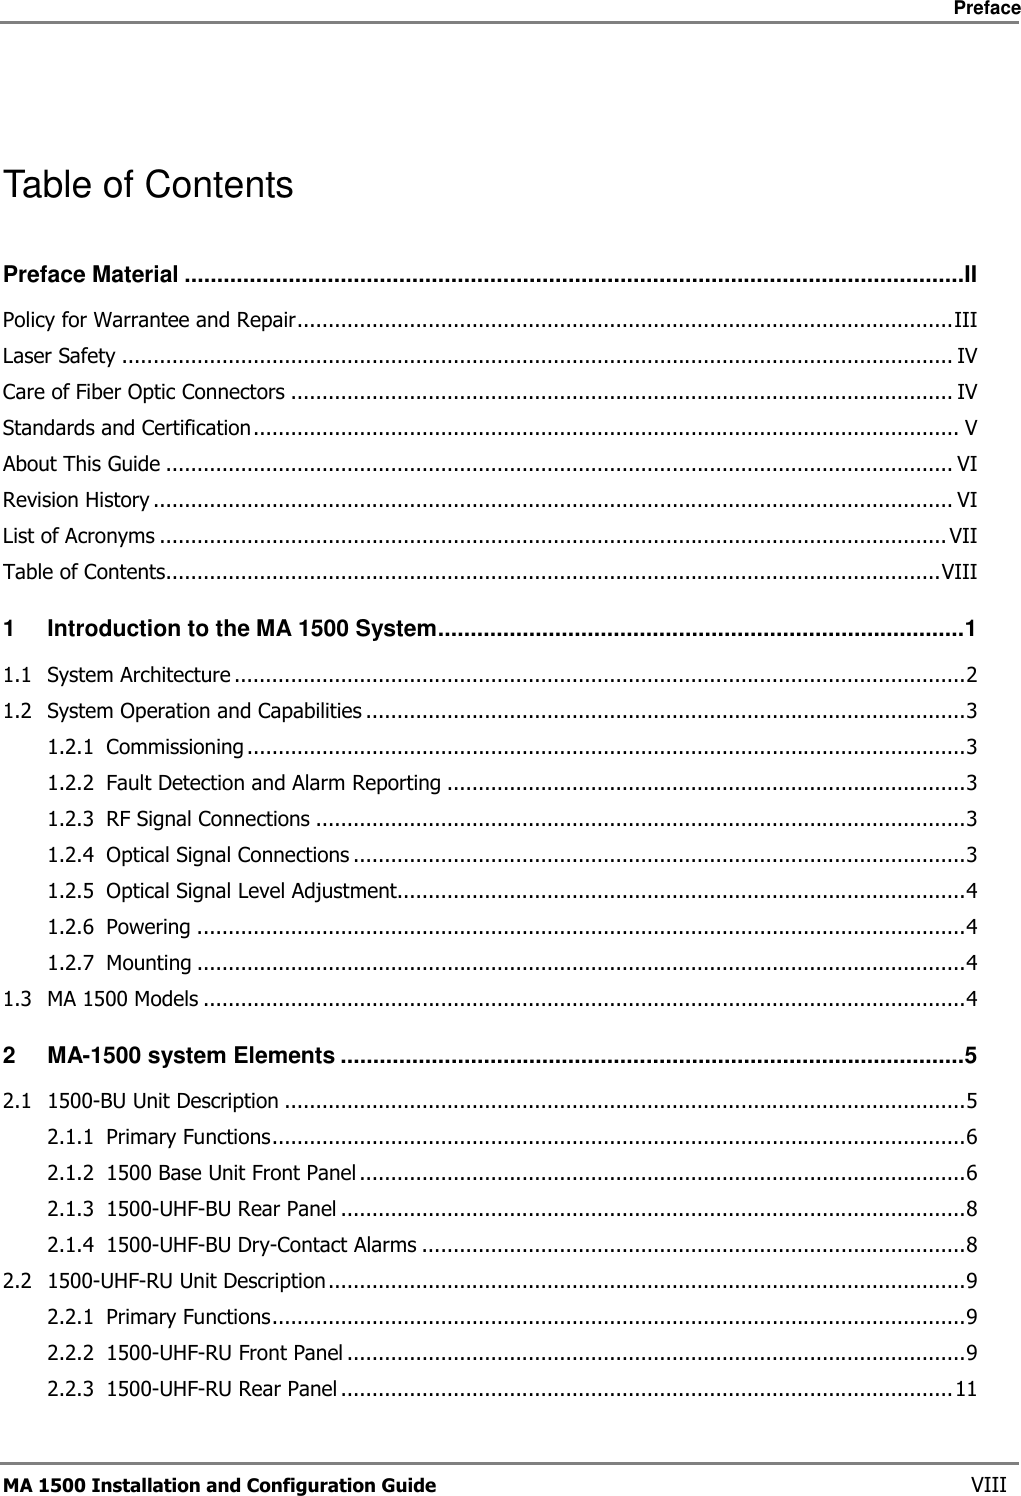     Preface       MA 1500 Installation and Configuration Guide    VIII  Table of Contents Preface Material ........................................................................................................................II Policy for Warrantee and Repair.........................................................................................................III Laser Safety ..................................................................................................................................... IV Care of Fiber Optic Connectors .......................................................................................................... IV Standards and Certification................................................................................................................. V About This Guide .............................................................................................................................. VI Revision History ................................................................................................................................ VI List of Acronyms ..............................................................................................................................VII Table of Contents............................................................................................................................VIII 1 Introduction to the MA 1500 System.................................................................................1 1.1 System Architecture .....................................................................................................................2 1.2 System Operation and Capabilities ................................................................................................3 1.2.1 Commissioning ...................................................................................................................3 1.2.2 Fault Detection and Alarm Reporting ...................................................................................3 1.2.3 RF Signal Connections ........................................................................................................3 1.2.4 Optical Signal Connections ..................................................................................................3 1.2.5 Optical Signal Level Adjustment...........................................................................................4 1.2.6 Powering ...........................................................................................................................4 1.2.7 Mounting ...........................................................................................................................4 1.3 MA 1500 Models ..........................................................................................................................4 2 MA-1500 system Elements ................................................................................................5 2.1 1500-BU Unit Description .............................................................................................................5 2.1.1 Primary Functions...............................................................................................................6 2.1.2 1500 Base Unit Front Panel .................................................................................................6 2.1.3 1500-UHF-BU Rear Panel ....................................................................................................8 2.1.4 1500-UHF-BU Dry-Contact Alarms .......................................................................................8 2.2 1500-UHF-RU Unit Description......................................................................................................9 2.2.1 Primary Functions...............................................................................................................9 2.2.2 1500-UHF-RU Front Panel ...................................................................................................9 2.2.3 1500-UHF-RU Rear Panel ..................................................................................................11 